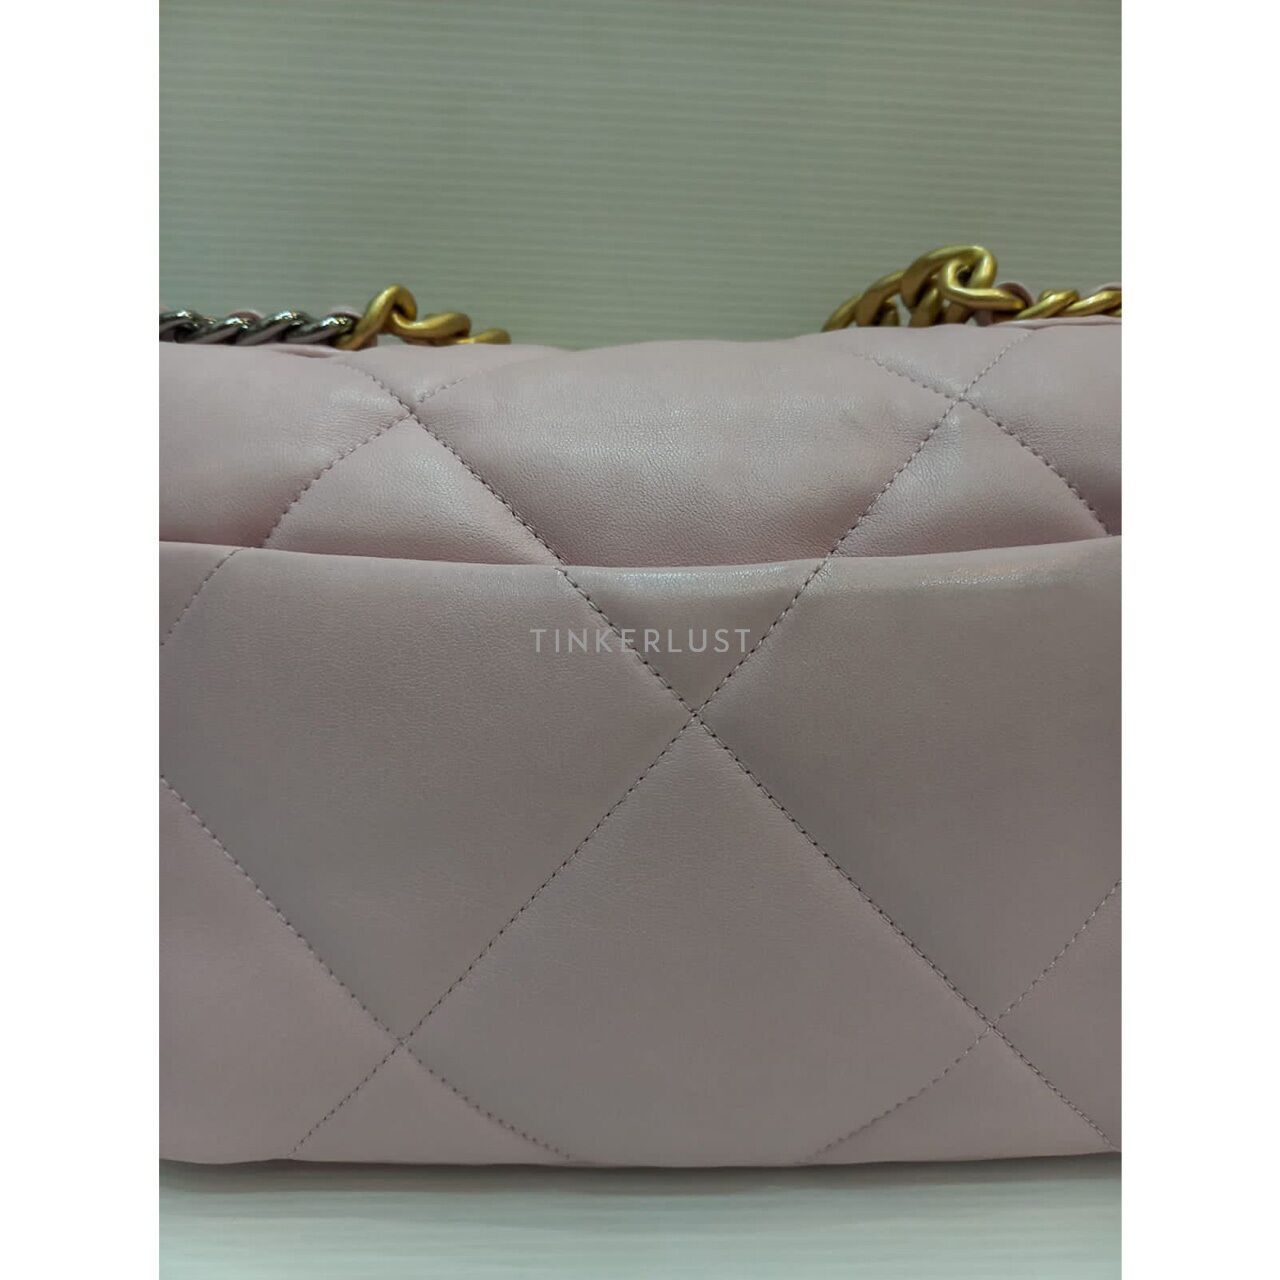 Chanel C19 Small Pink Lambskin GHW #31 2021 Sling Bag